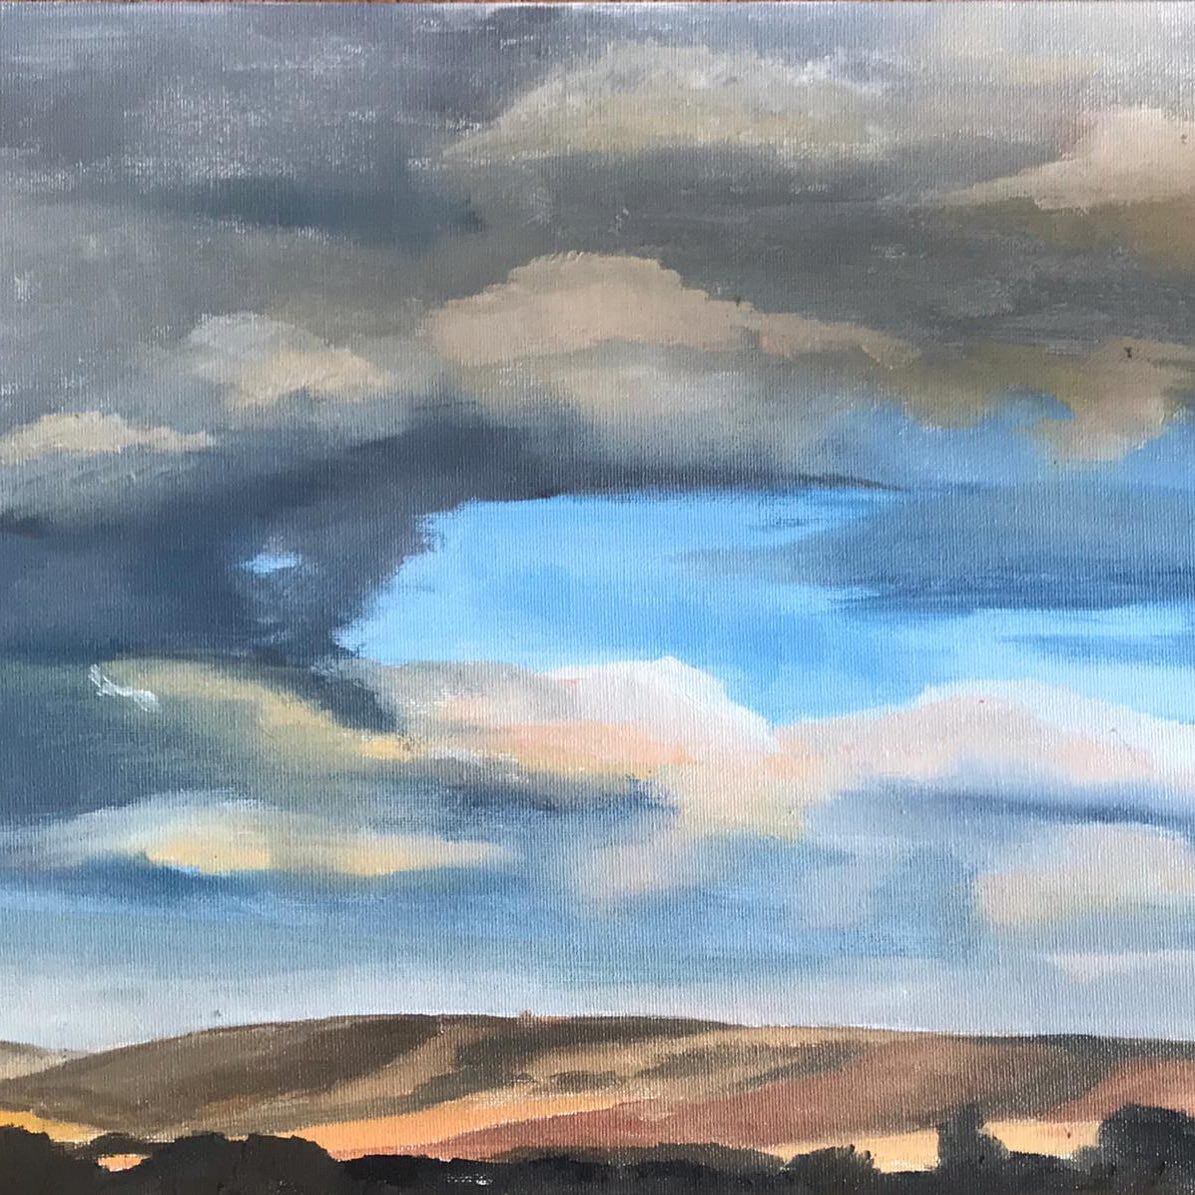 Wonderful landscape paintings of the Ouse valley by Anna Macleod.  On show at St Nicholas Church venue 30 along with the work of many Iford and Swanborough artists. #artwavefestival #annamacleodart #egretswayart #landscapepainting #southdowns #egrets